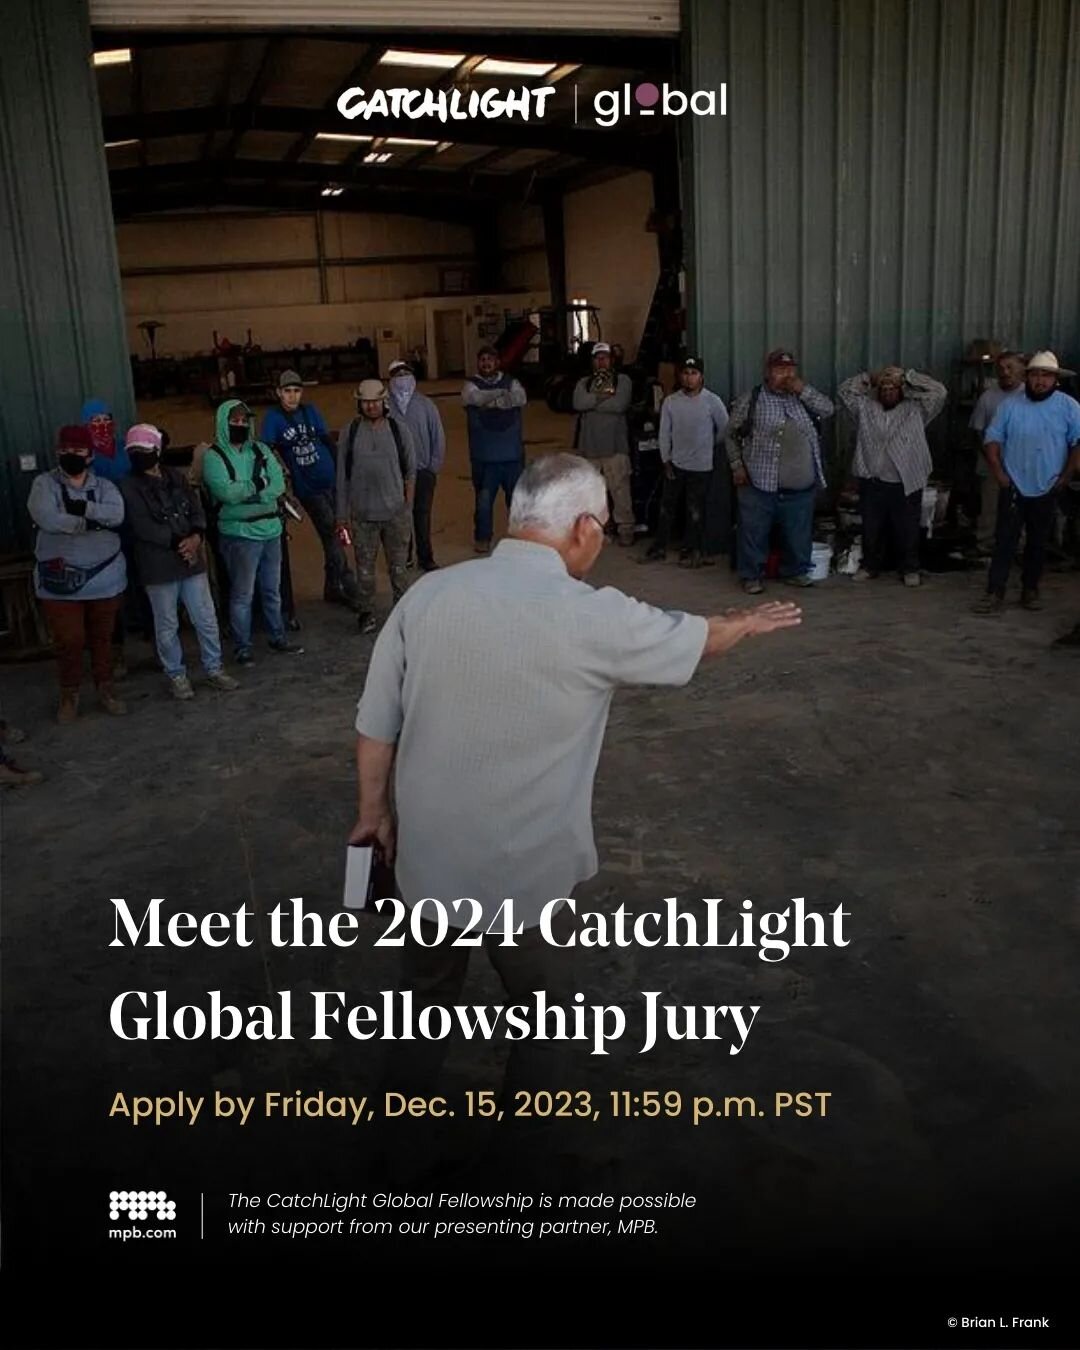 Link in bio to learn more about our 2024 #CatchLightGlobal fellowship jury. The EXTENDED DEADLINE to apply is this Friday, Dec. 15 at 11:59 p.m. PST. 

Program details and application at catchlight.io/global

The CatchLight Global Fellowship is made 